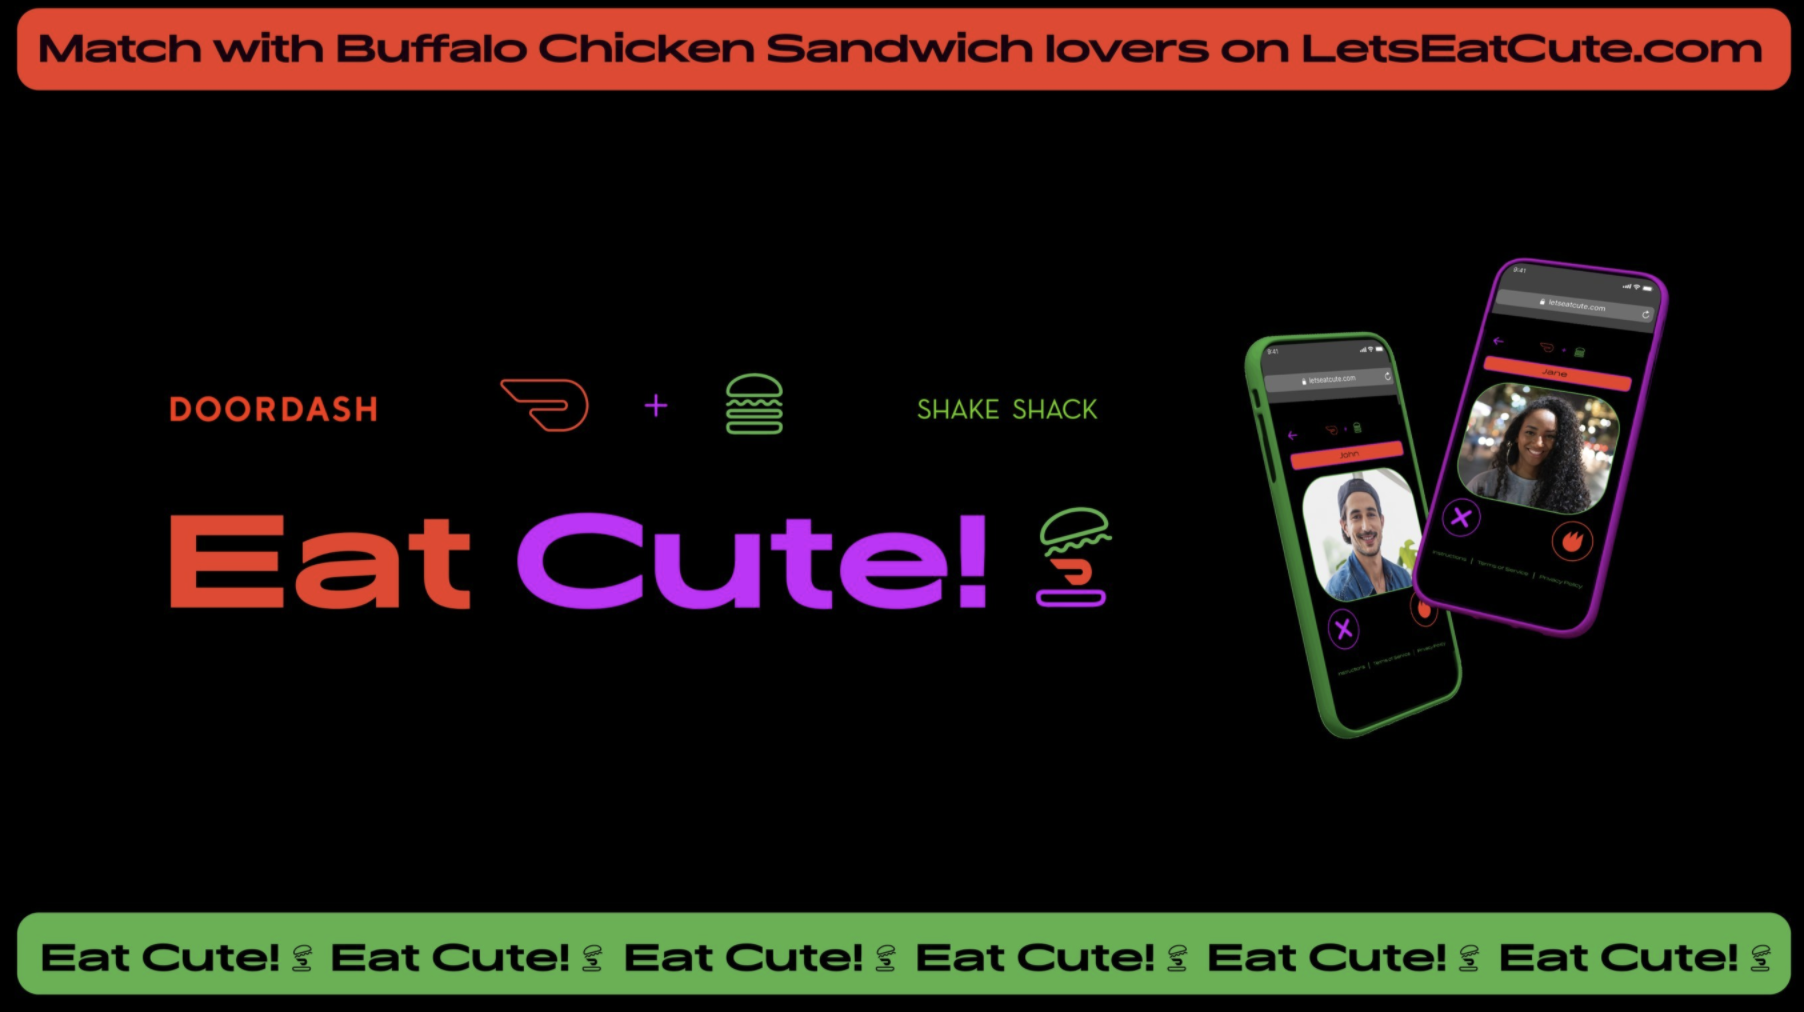 Shake Shack And DoorDash Are Partnering To Create A Spicy Dating App